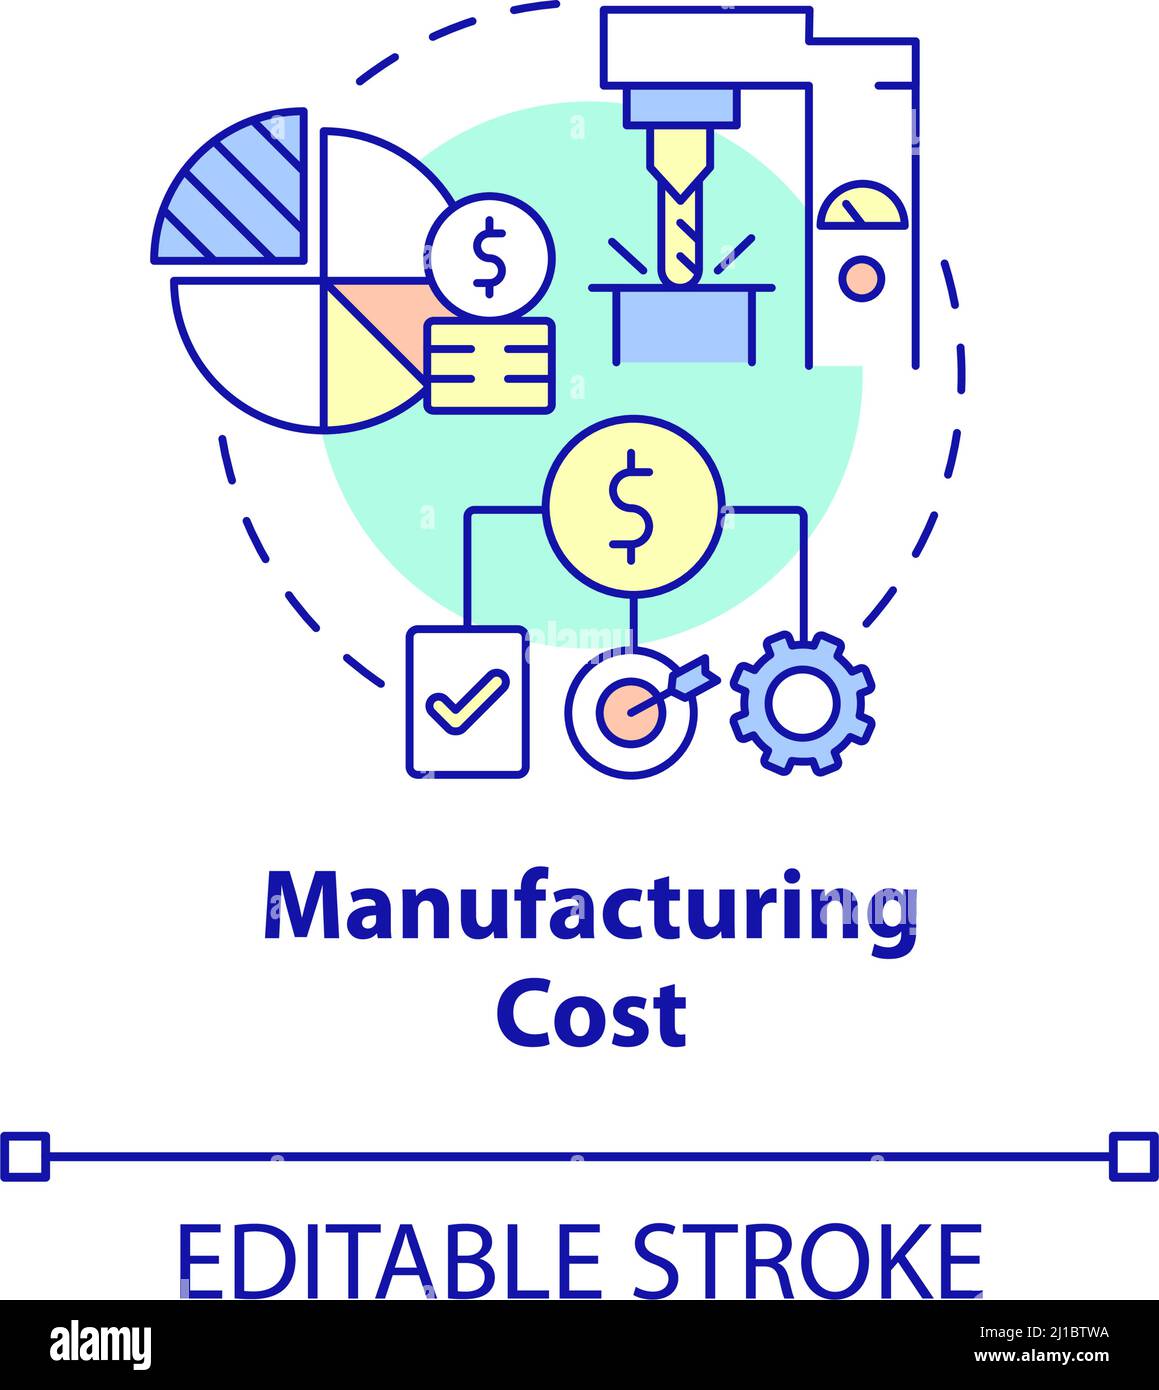 Manufacturing cost concept icon Stock Vector